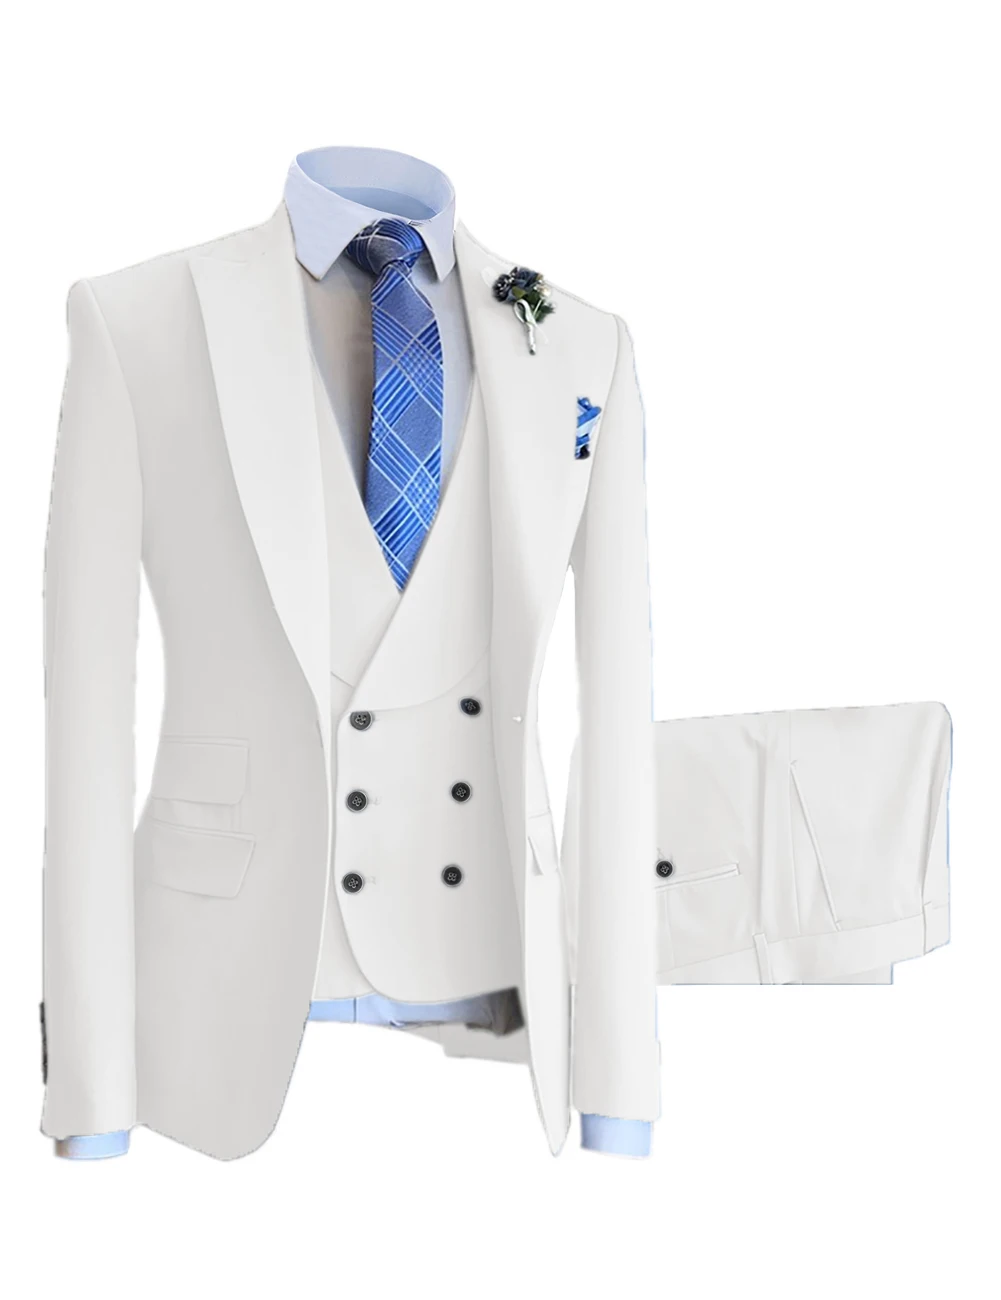 Mens White Three Piece Suit, Speciality : Comfortable, Attractive Designs,  Skin Friendly, Stylish at Best Price in Ludhiana